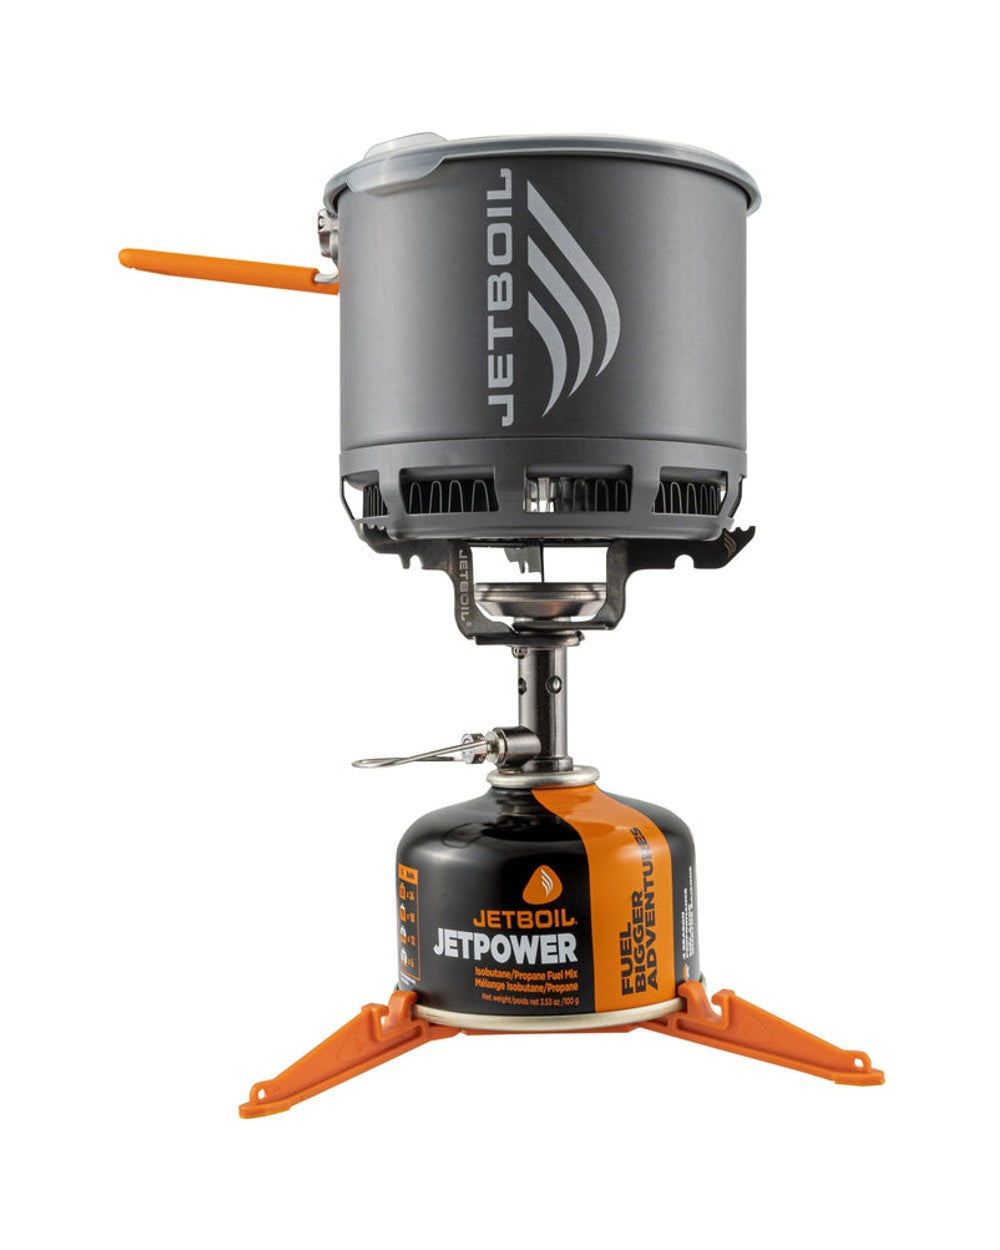 Jetboil Stash Cooking System In Carbon